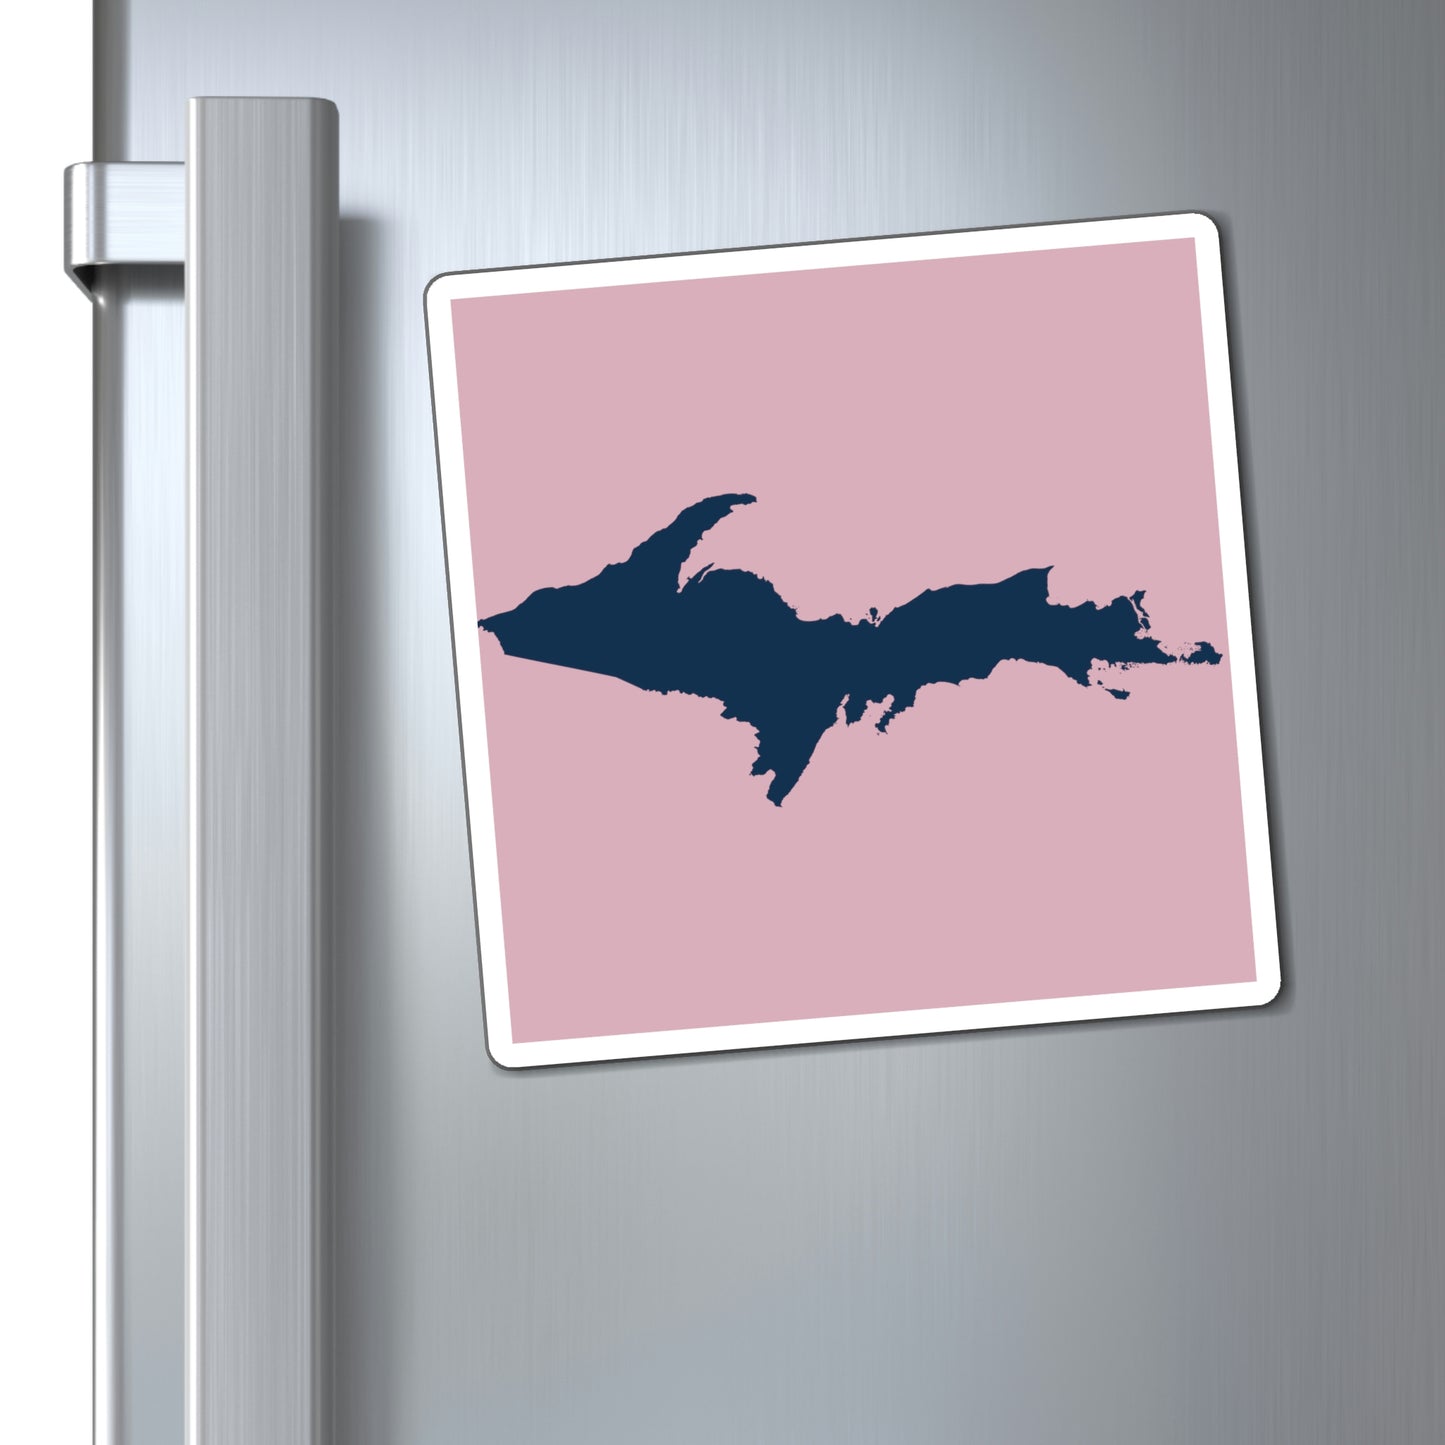 Michigan Upper Peninsula Square Magnet (Pink w/ Navy UP Outline)